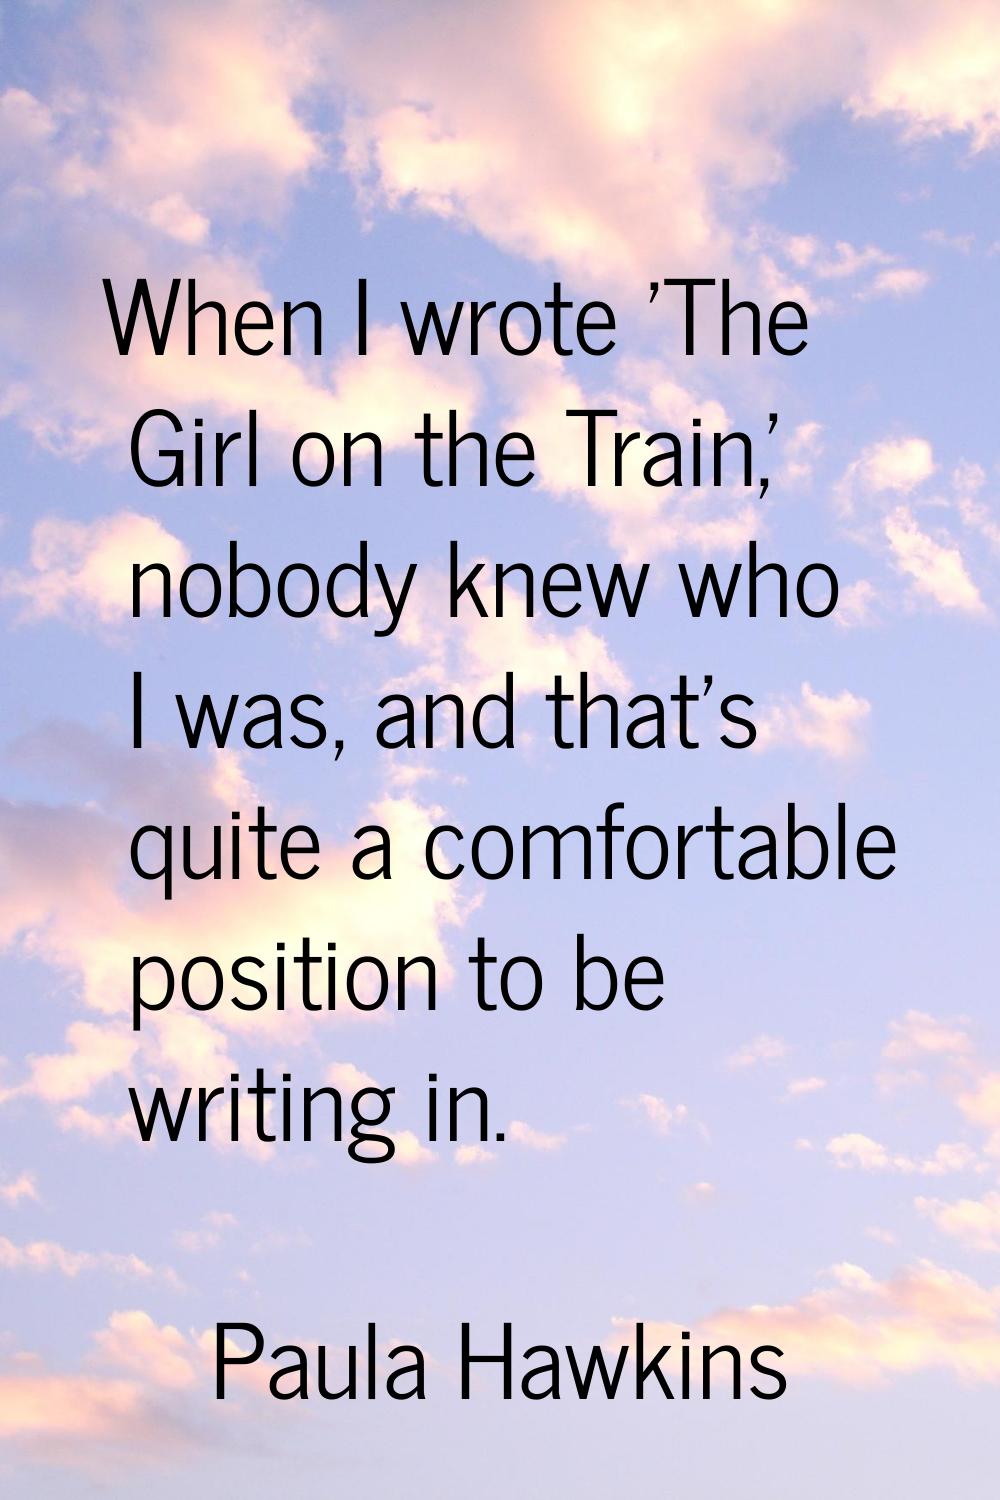 When I wrote 'The Girl on the Train,' nobody knew who I was, and that's quite a comfortable positio